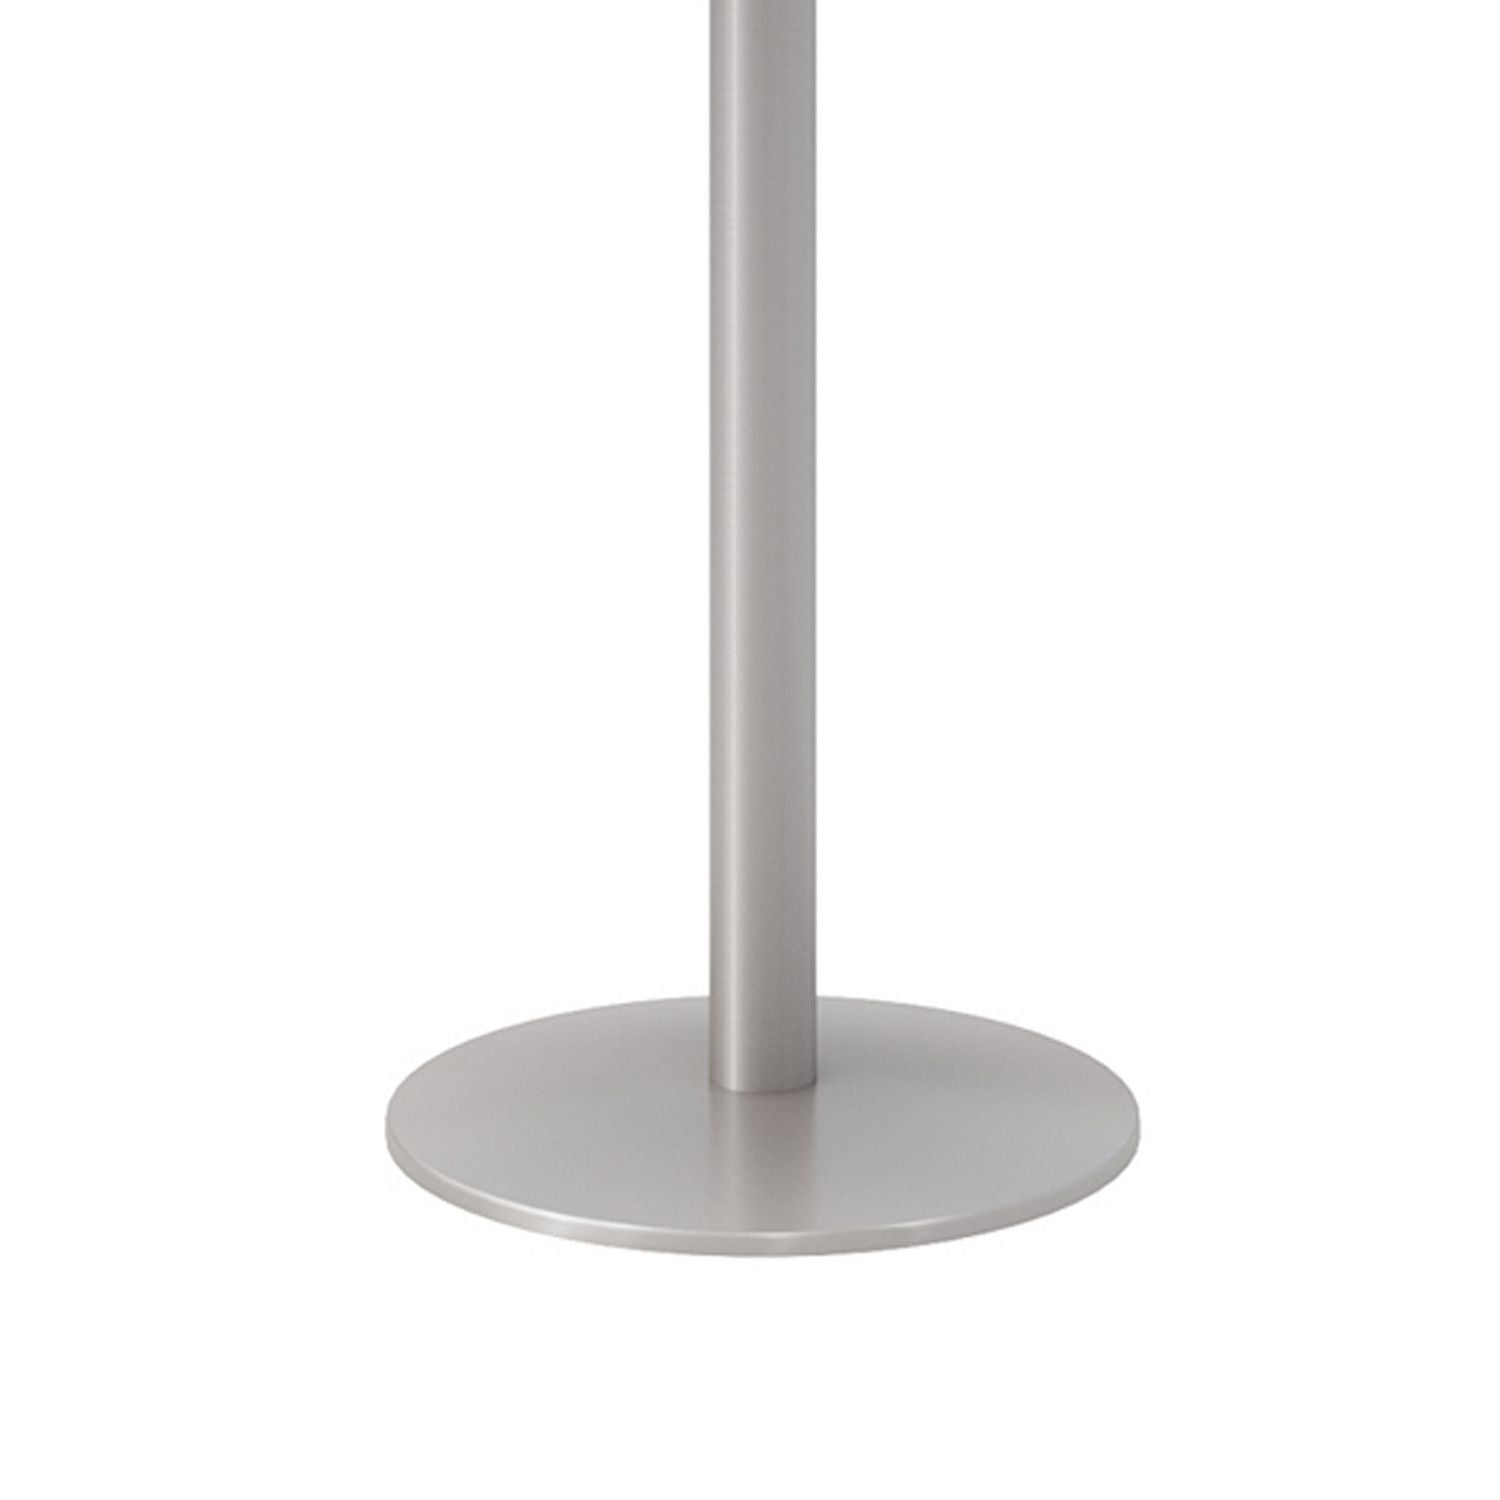 pedestal-bistro-table-with-four-white-jive-series-barstools-round-36-dia-x-41h-designer-white-ships-in-4-6-business-days_kfi840031900128 - 2